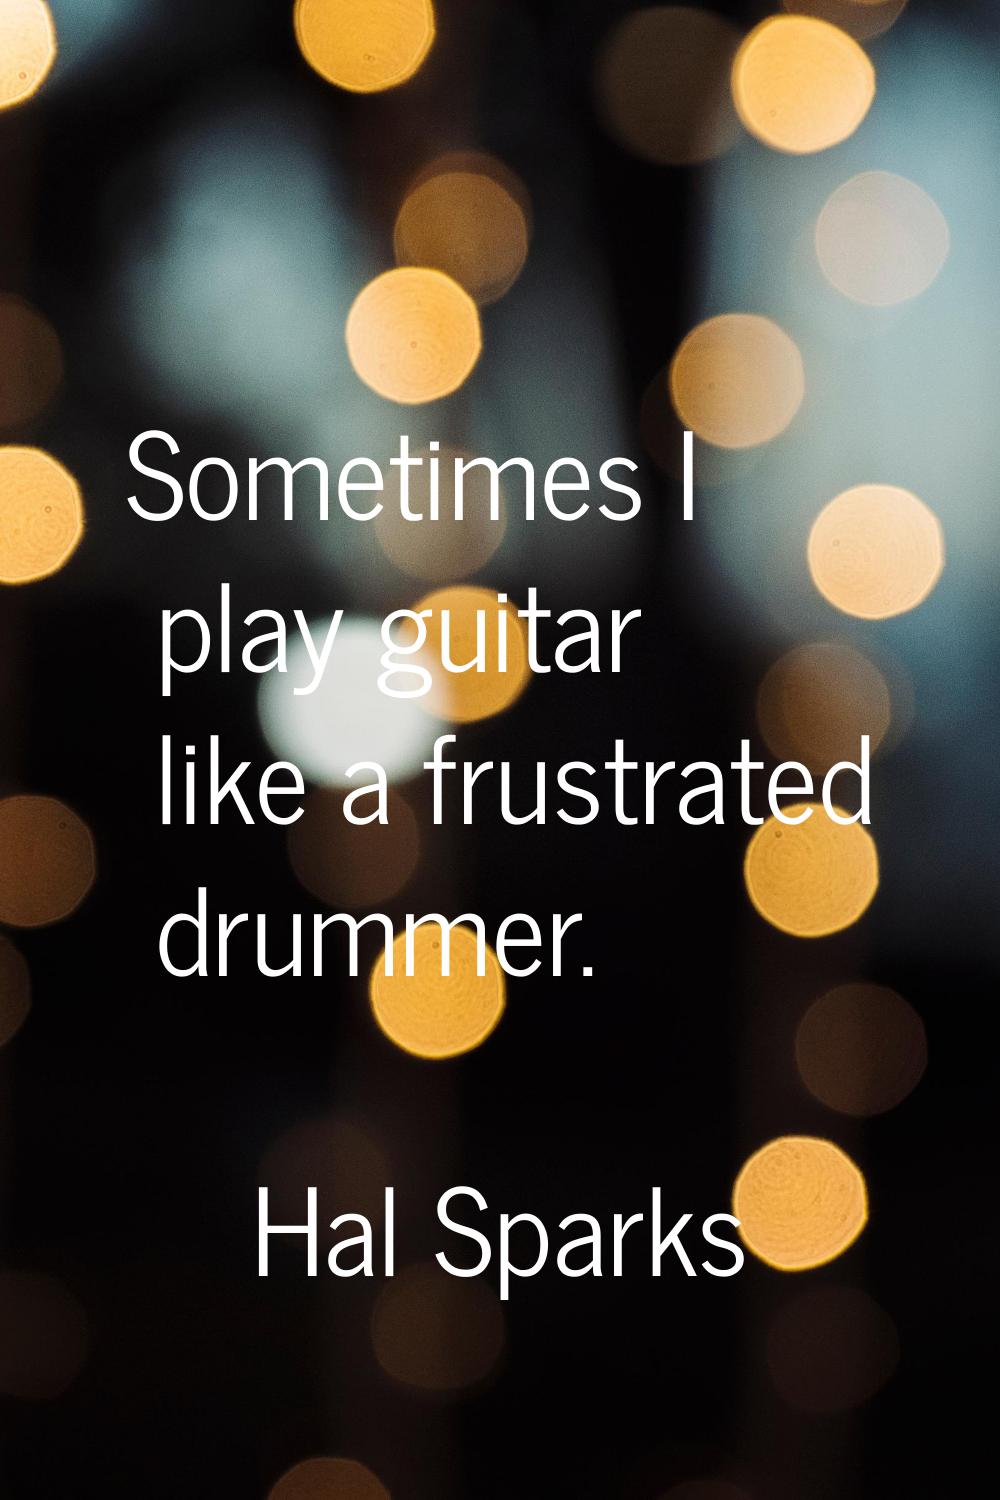 Sometimes I play guitar like a frustrated drummer.